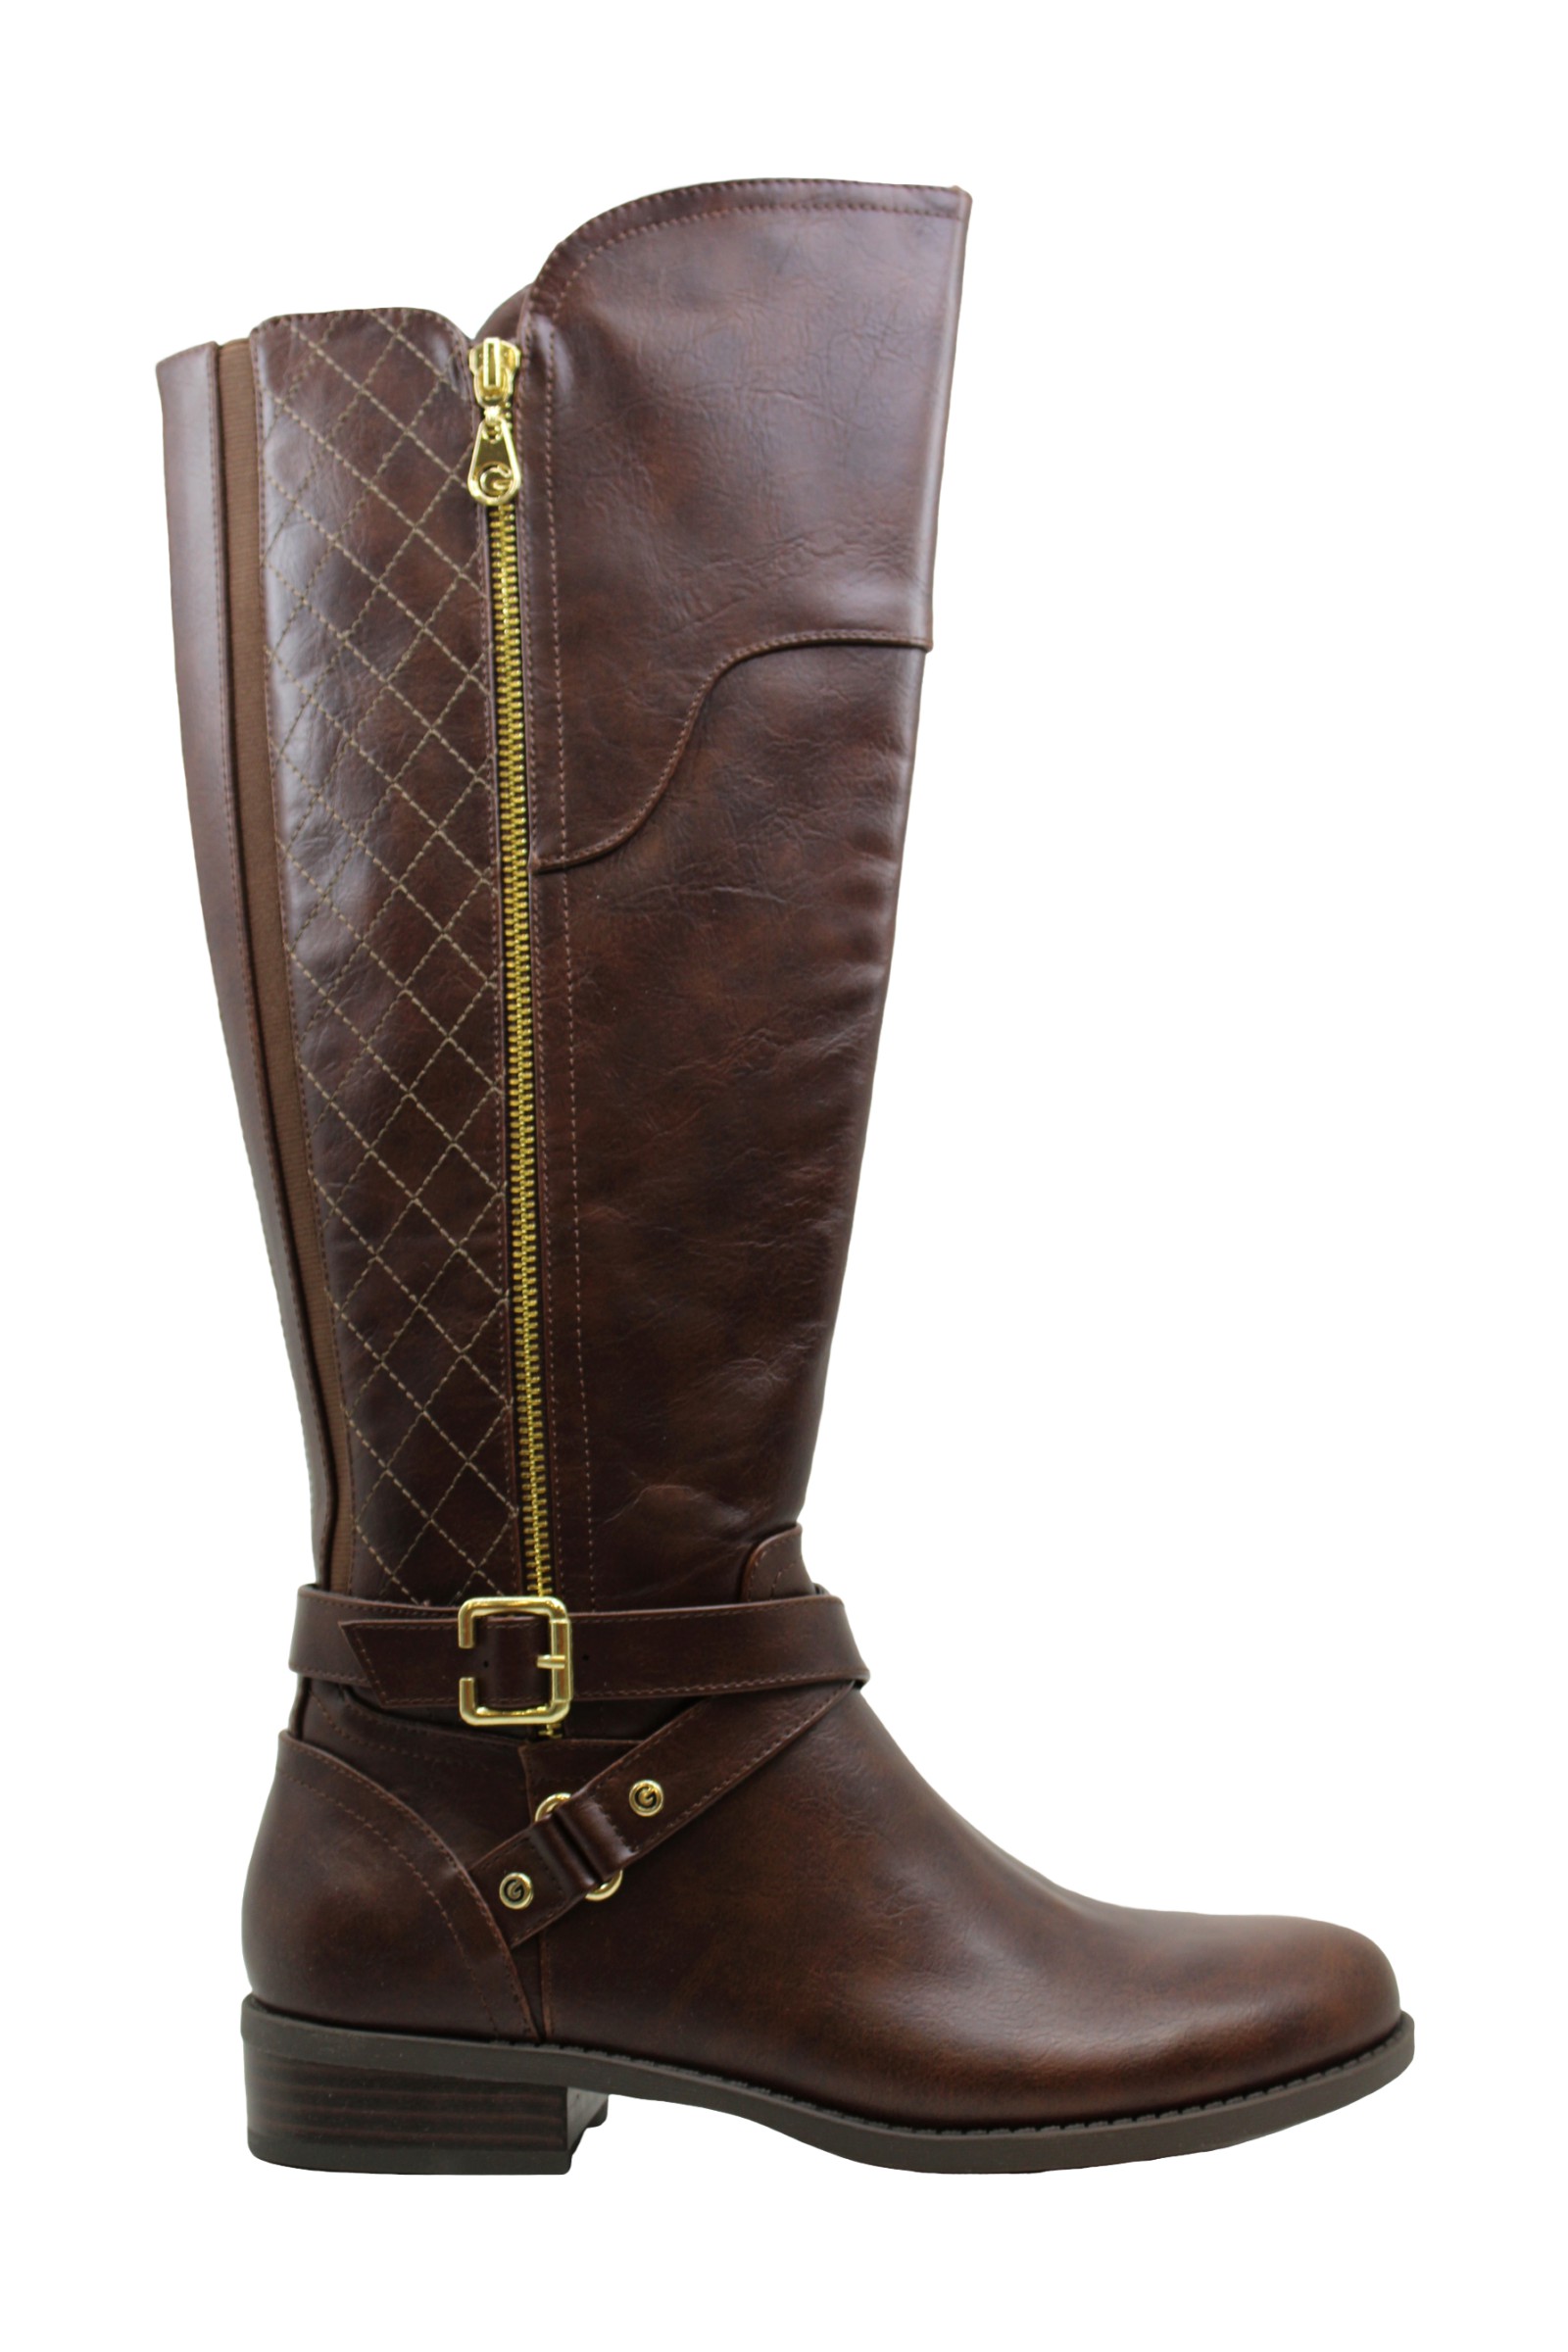 G by Guess Womens Haydin Brown Riding BOOTS Shoes 6 Medium (b M) 7389 ...